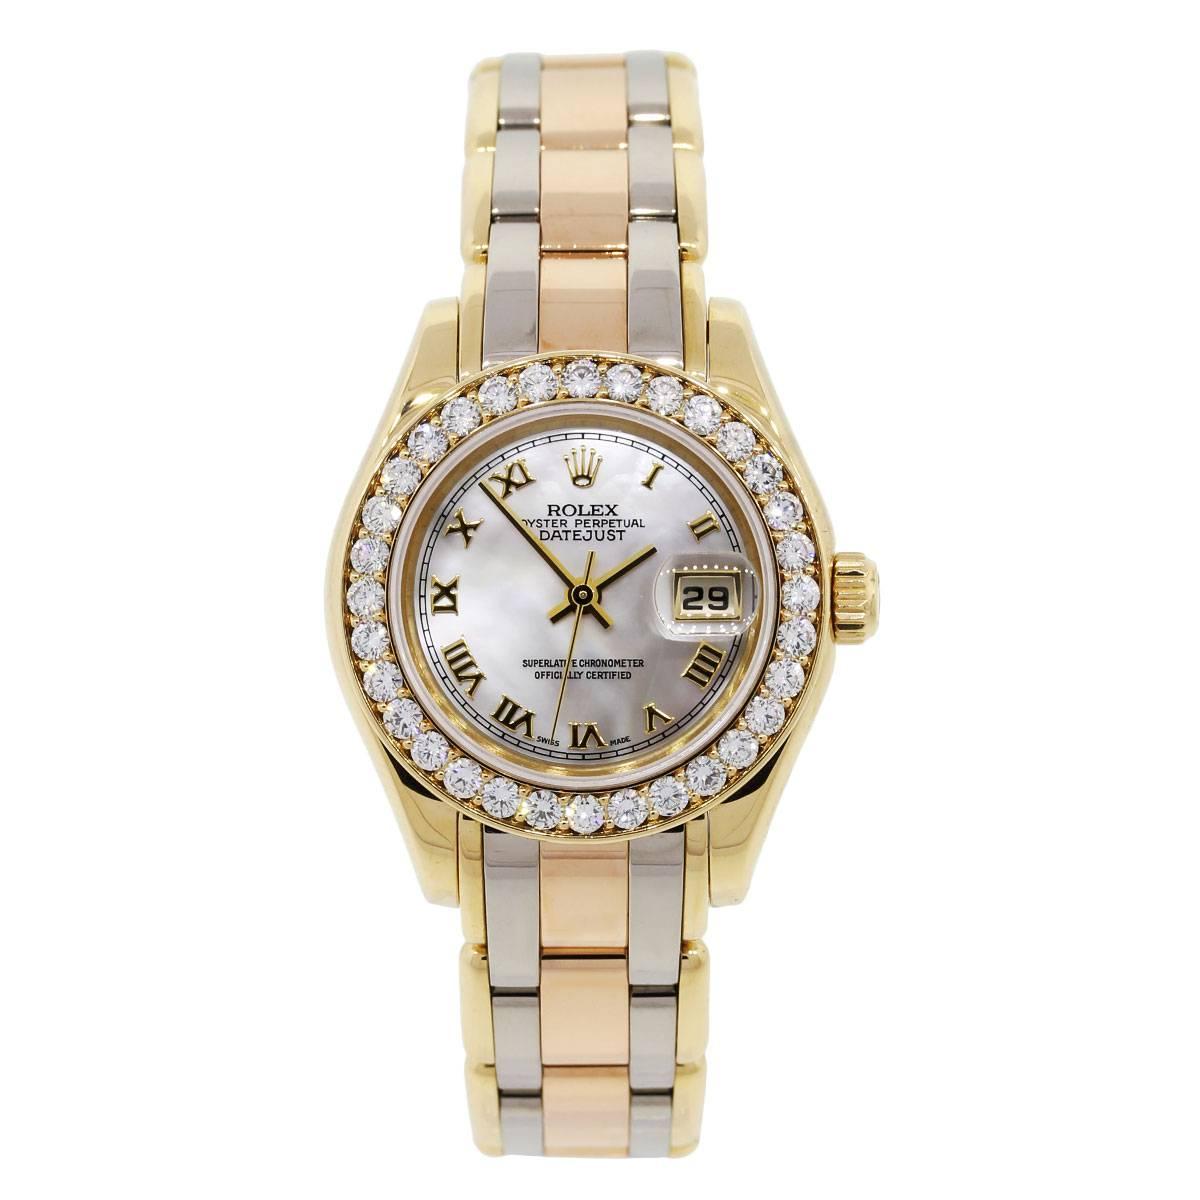 Brand: Rolex
MPN: 69298
Serial: "W"
Style: Datejust Tridor Pearlmaster
Material: 18k White Gold, 18k Rose Gold, 18k Yellow Gold
Dial: Mother of pearl roman dial with yellow gold roman numeral hour markers and date window at the 3